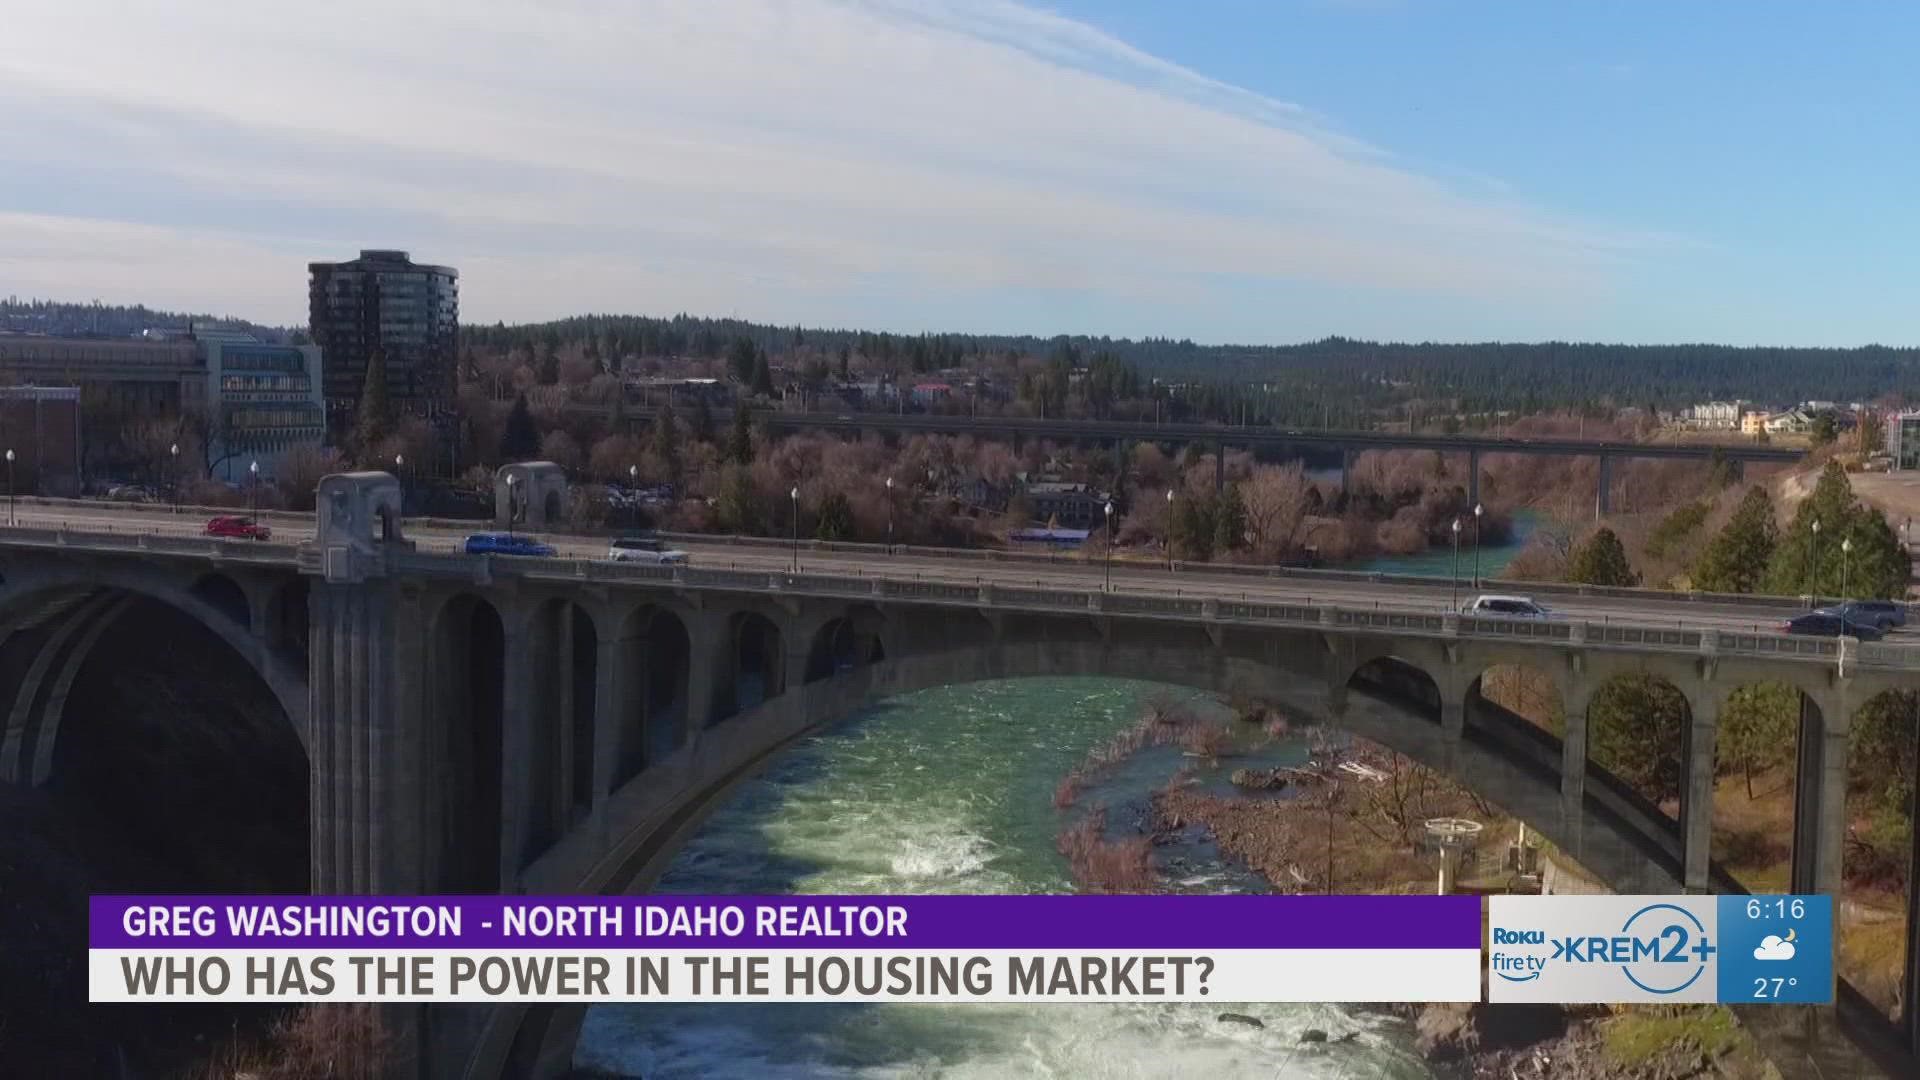 KREM 2 spoke with four Inland Northwest real estate experts to ask about the state of eastern Washington and north Idaho housing markets and who holds the most power